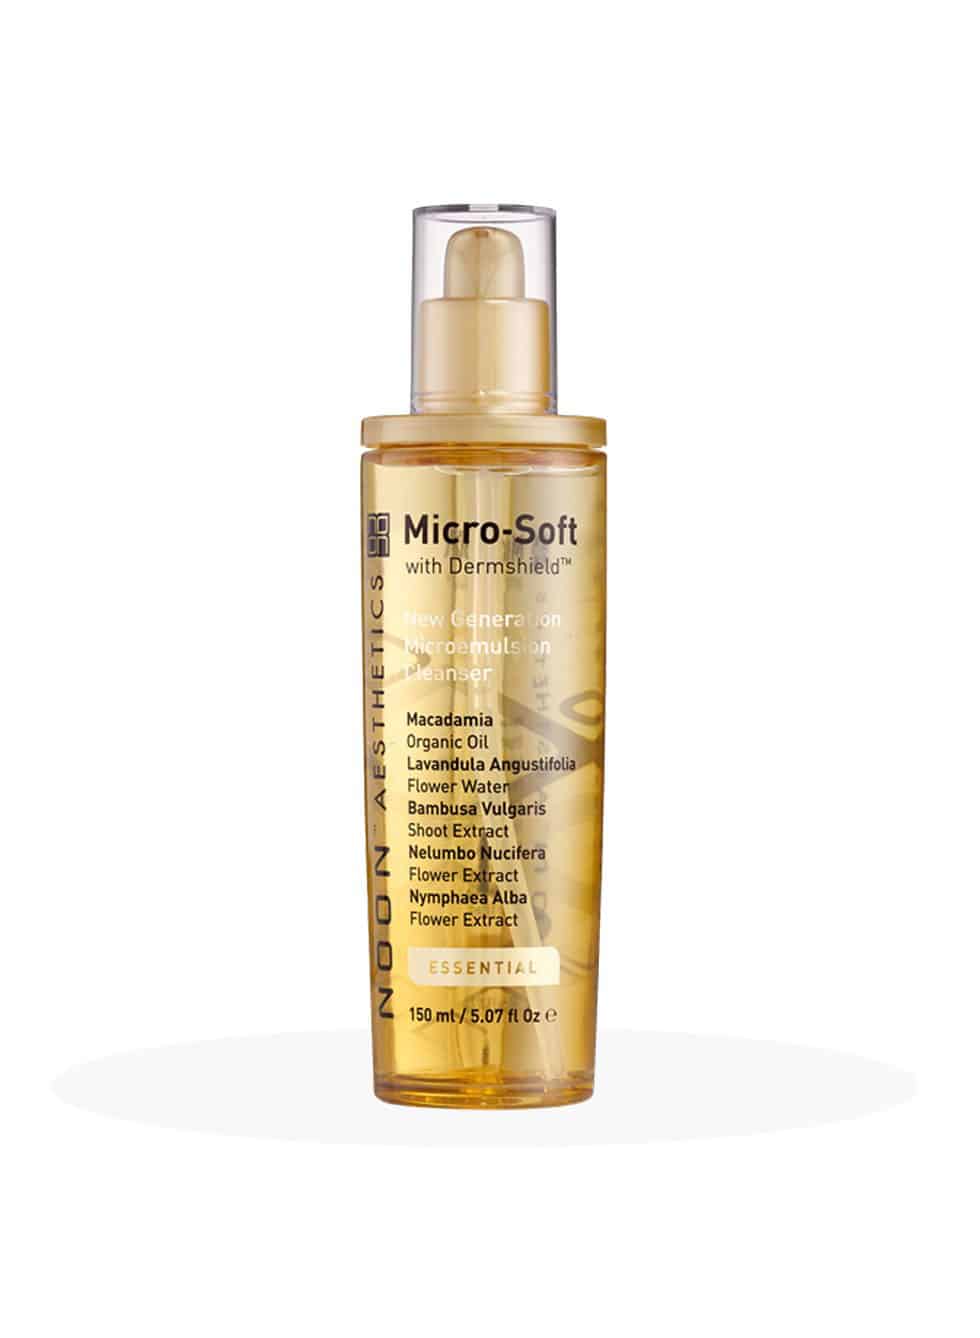 NOON Micro-Soft Cleanser